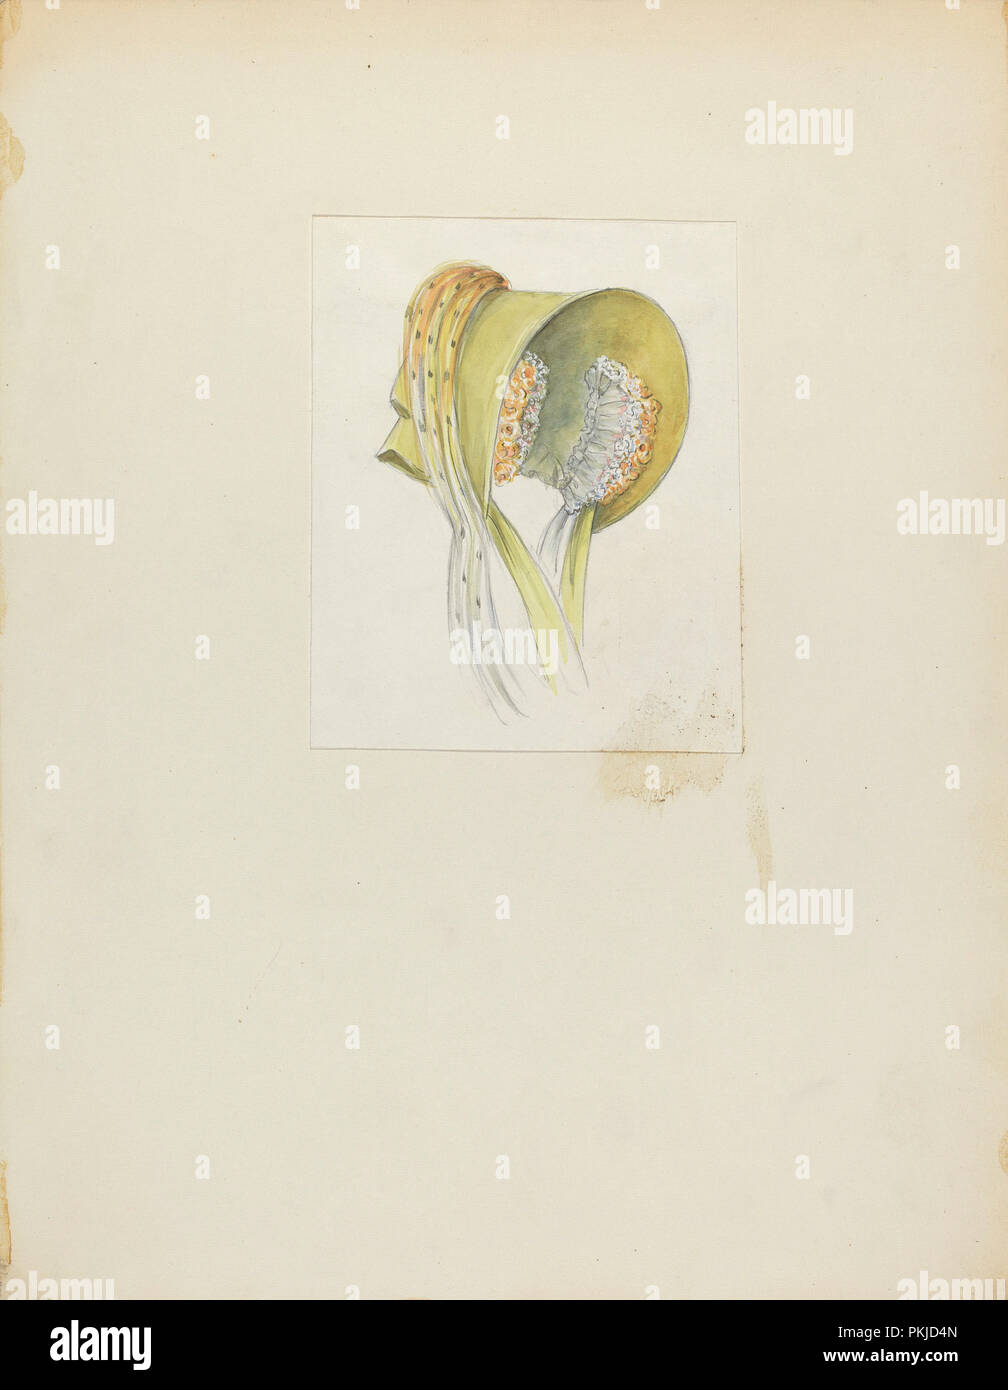 Bonnet. Dated: c. 1940. Dimensions: overall: 29.9 x 23.1 cm (11 3/4 x 9 1/8 in.). Medium: watercolor and graphite on paperboard. Museum: National Gallery of Art, Washington DC. Author: Jessie M. Benge. Stock Photo